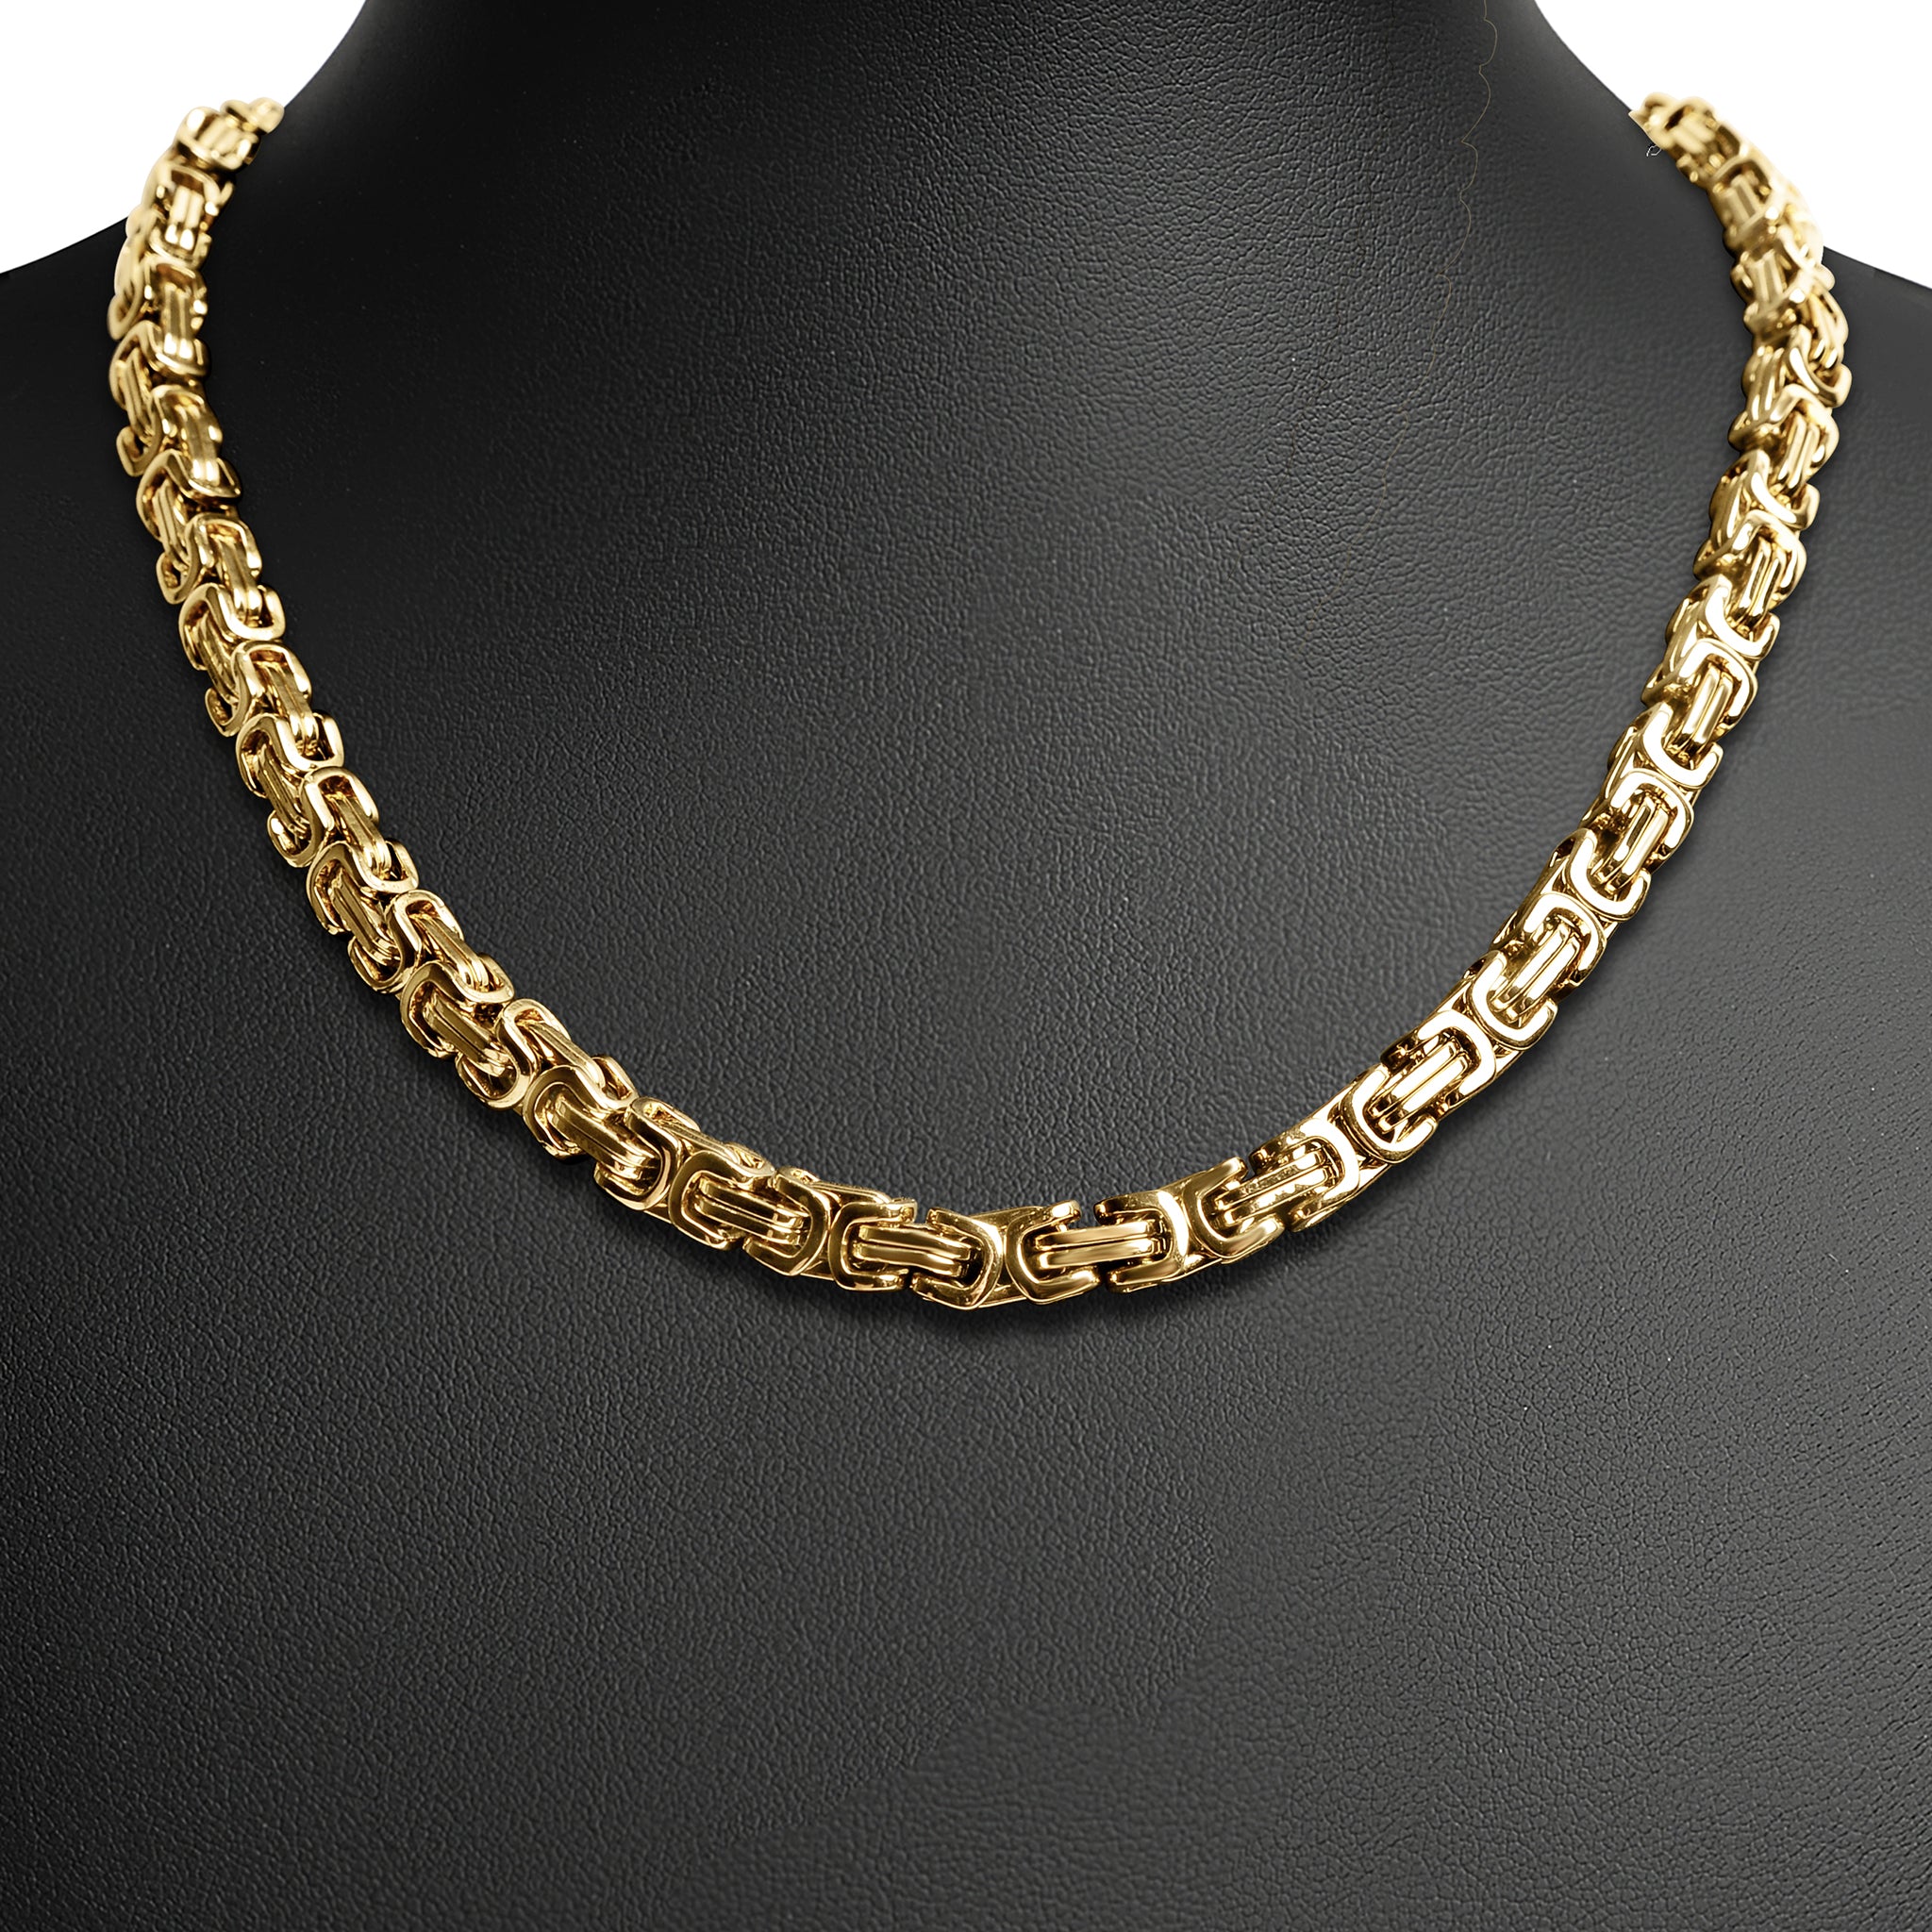 Byzantine Link Chain 14k Yellow Gold Necklace 20